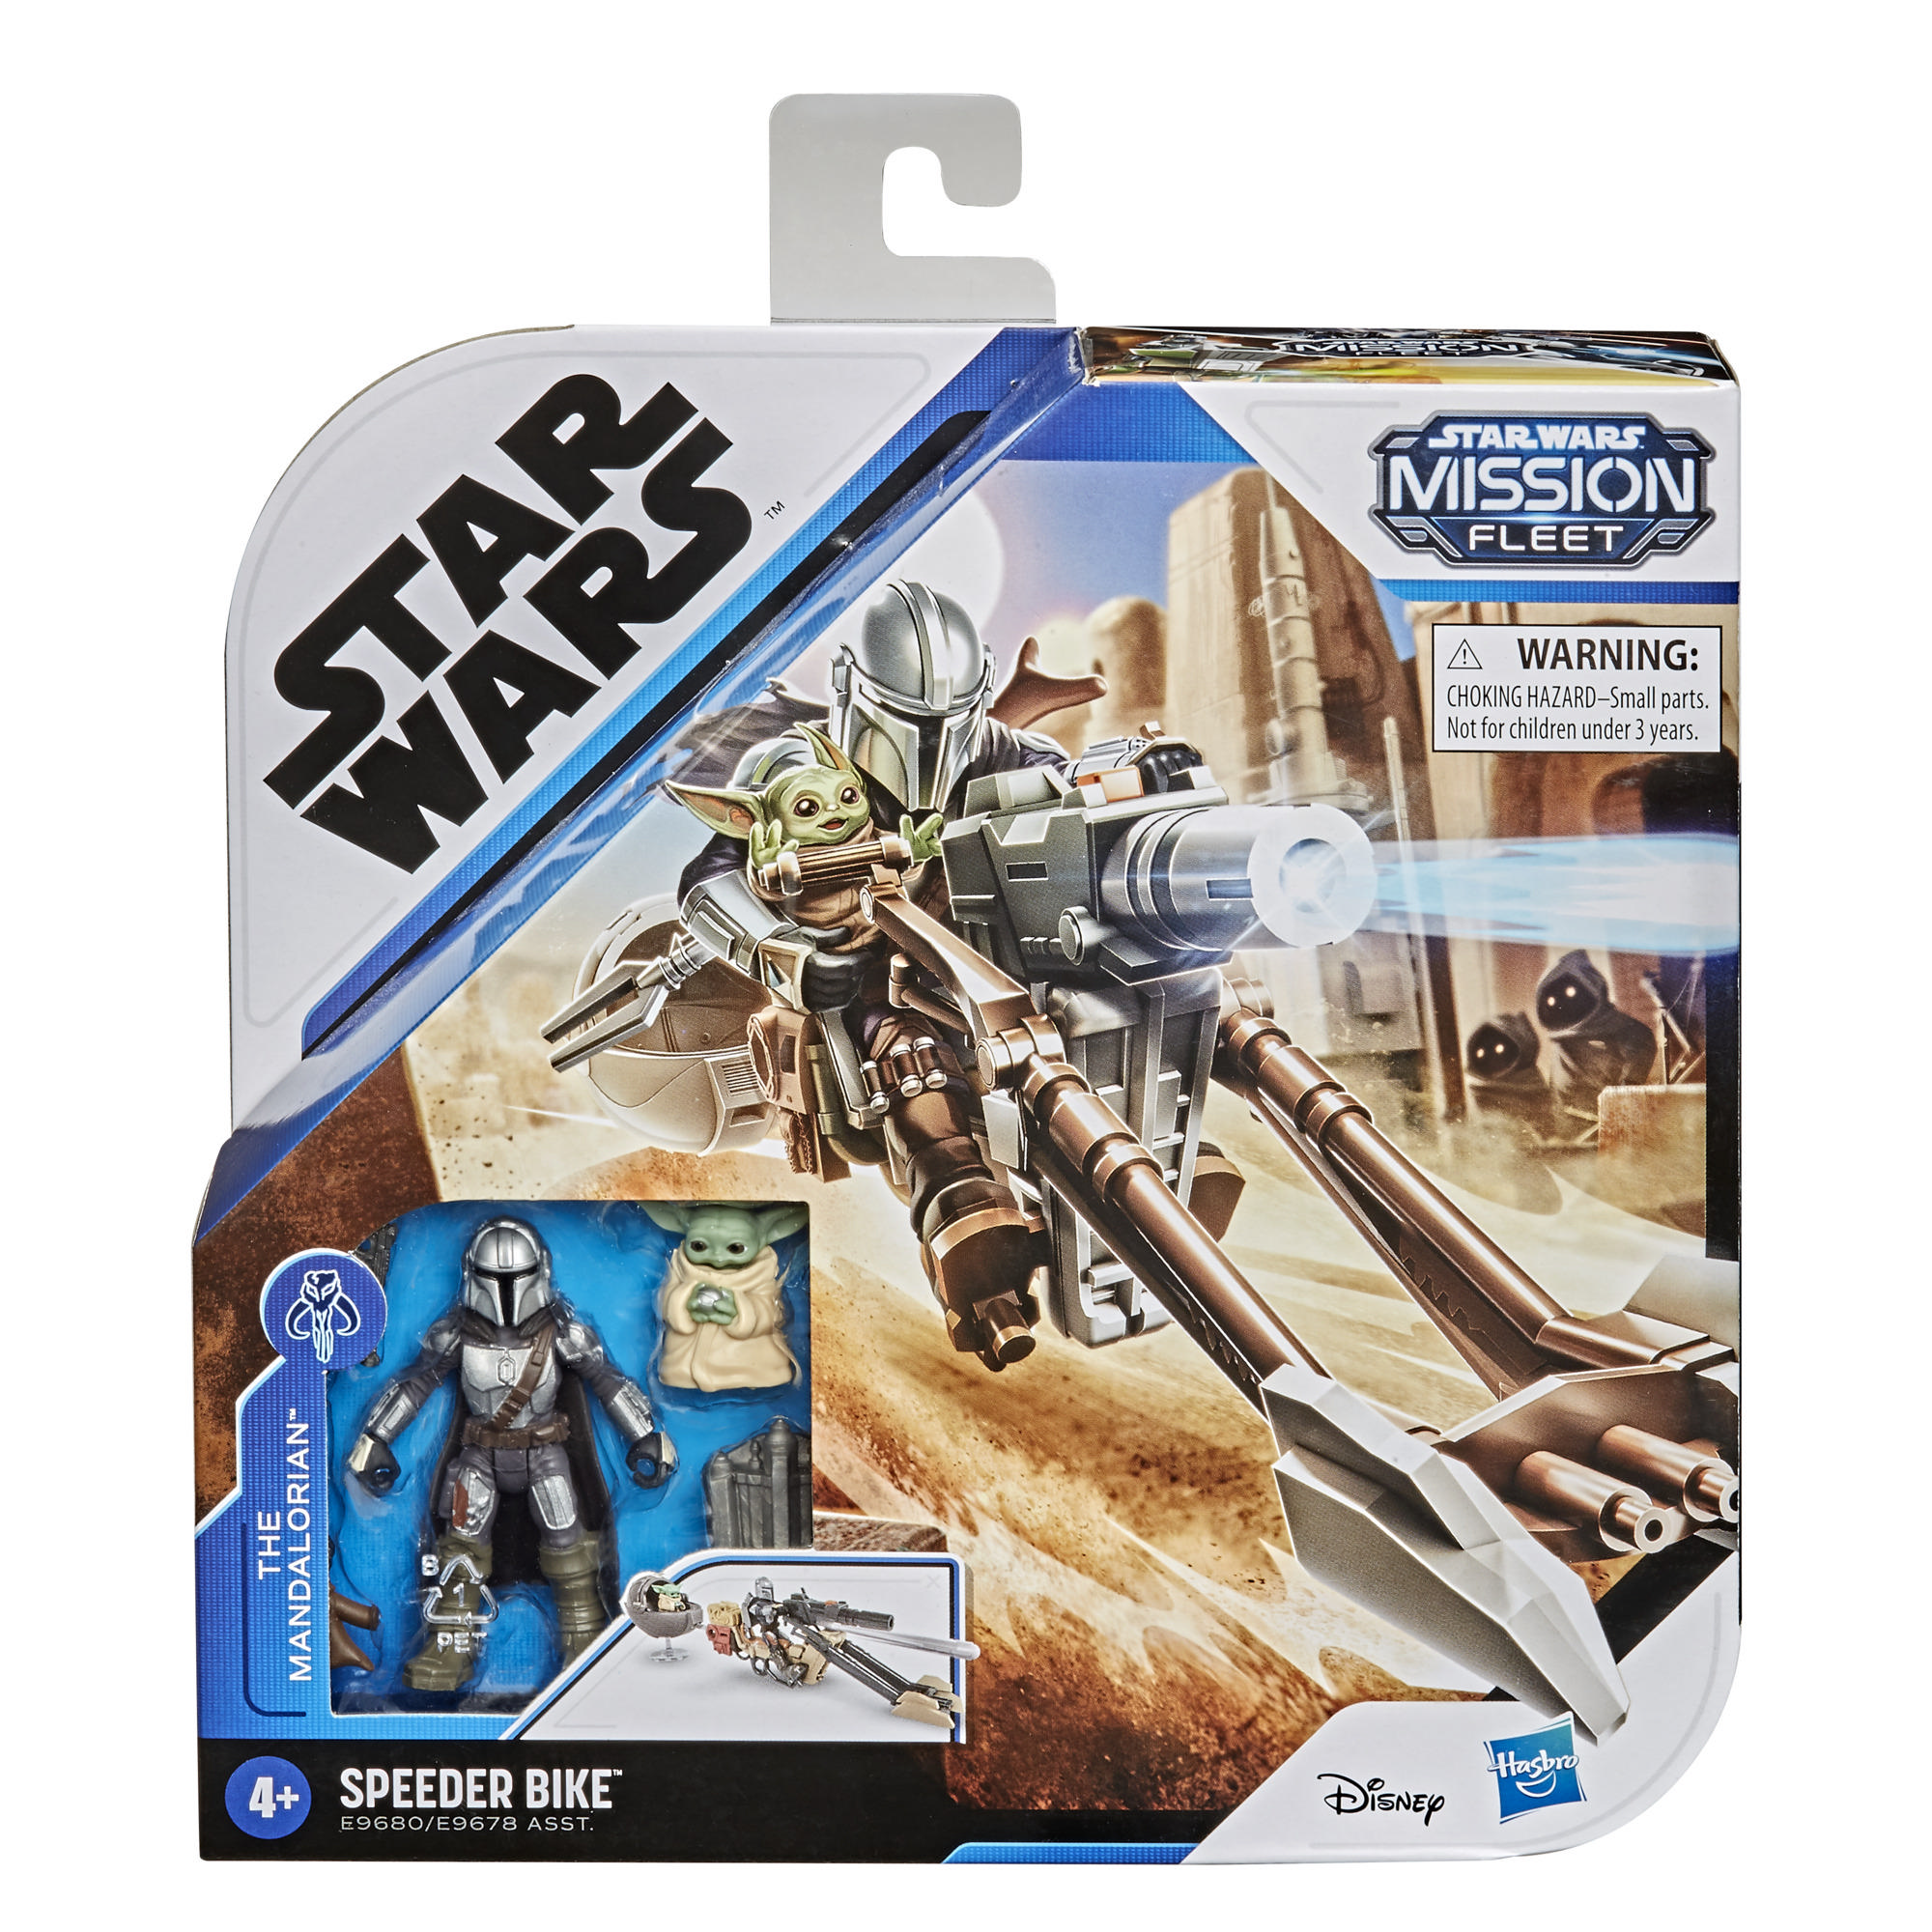 Mission Fleet Expedition Class The Mandalorian Action Figure for sale online Star Wars